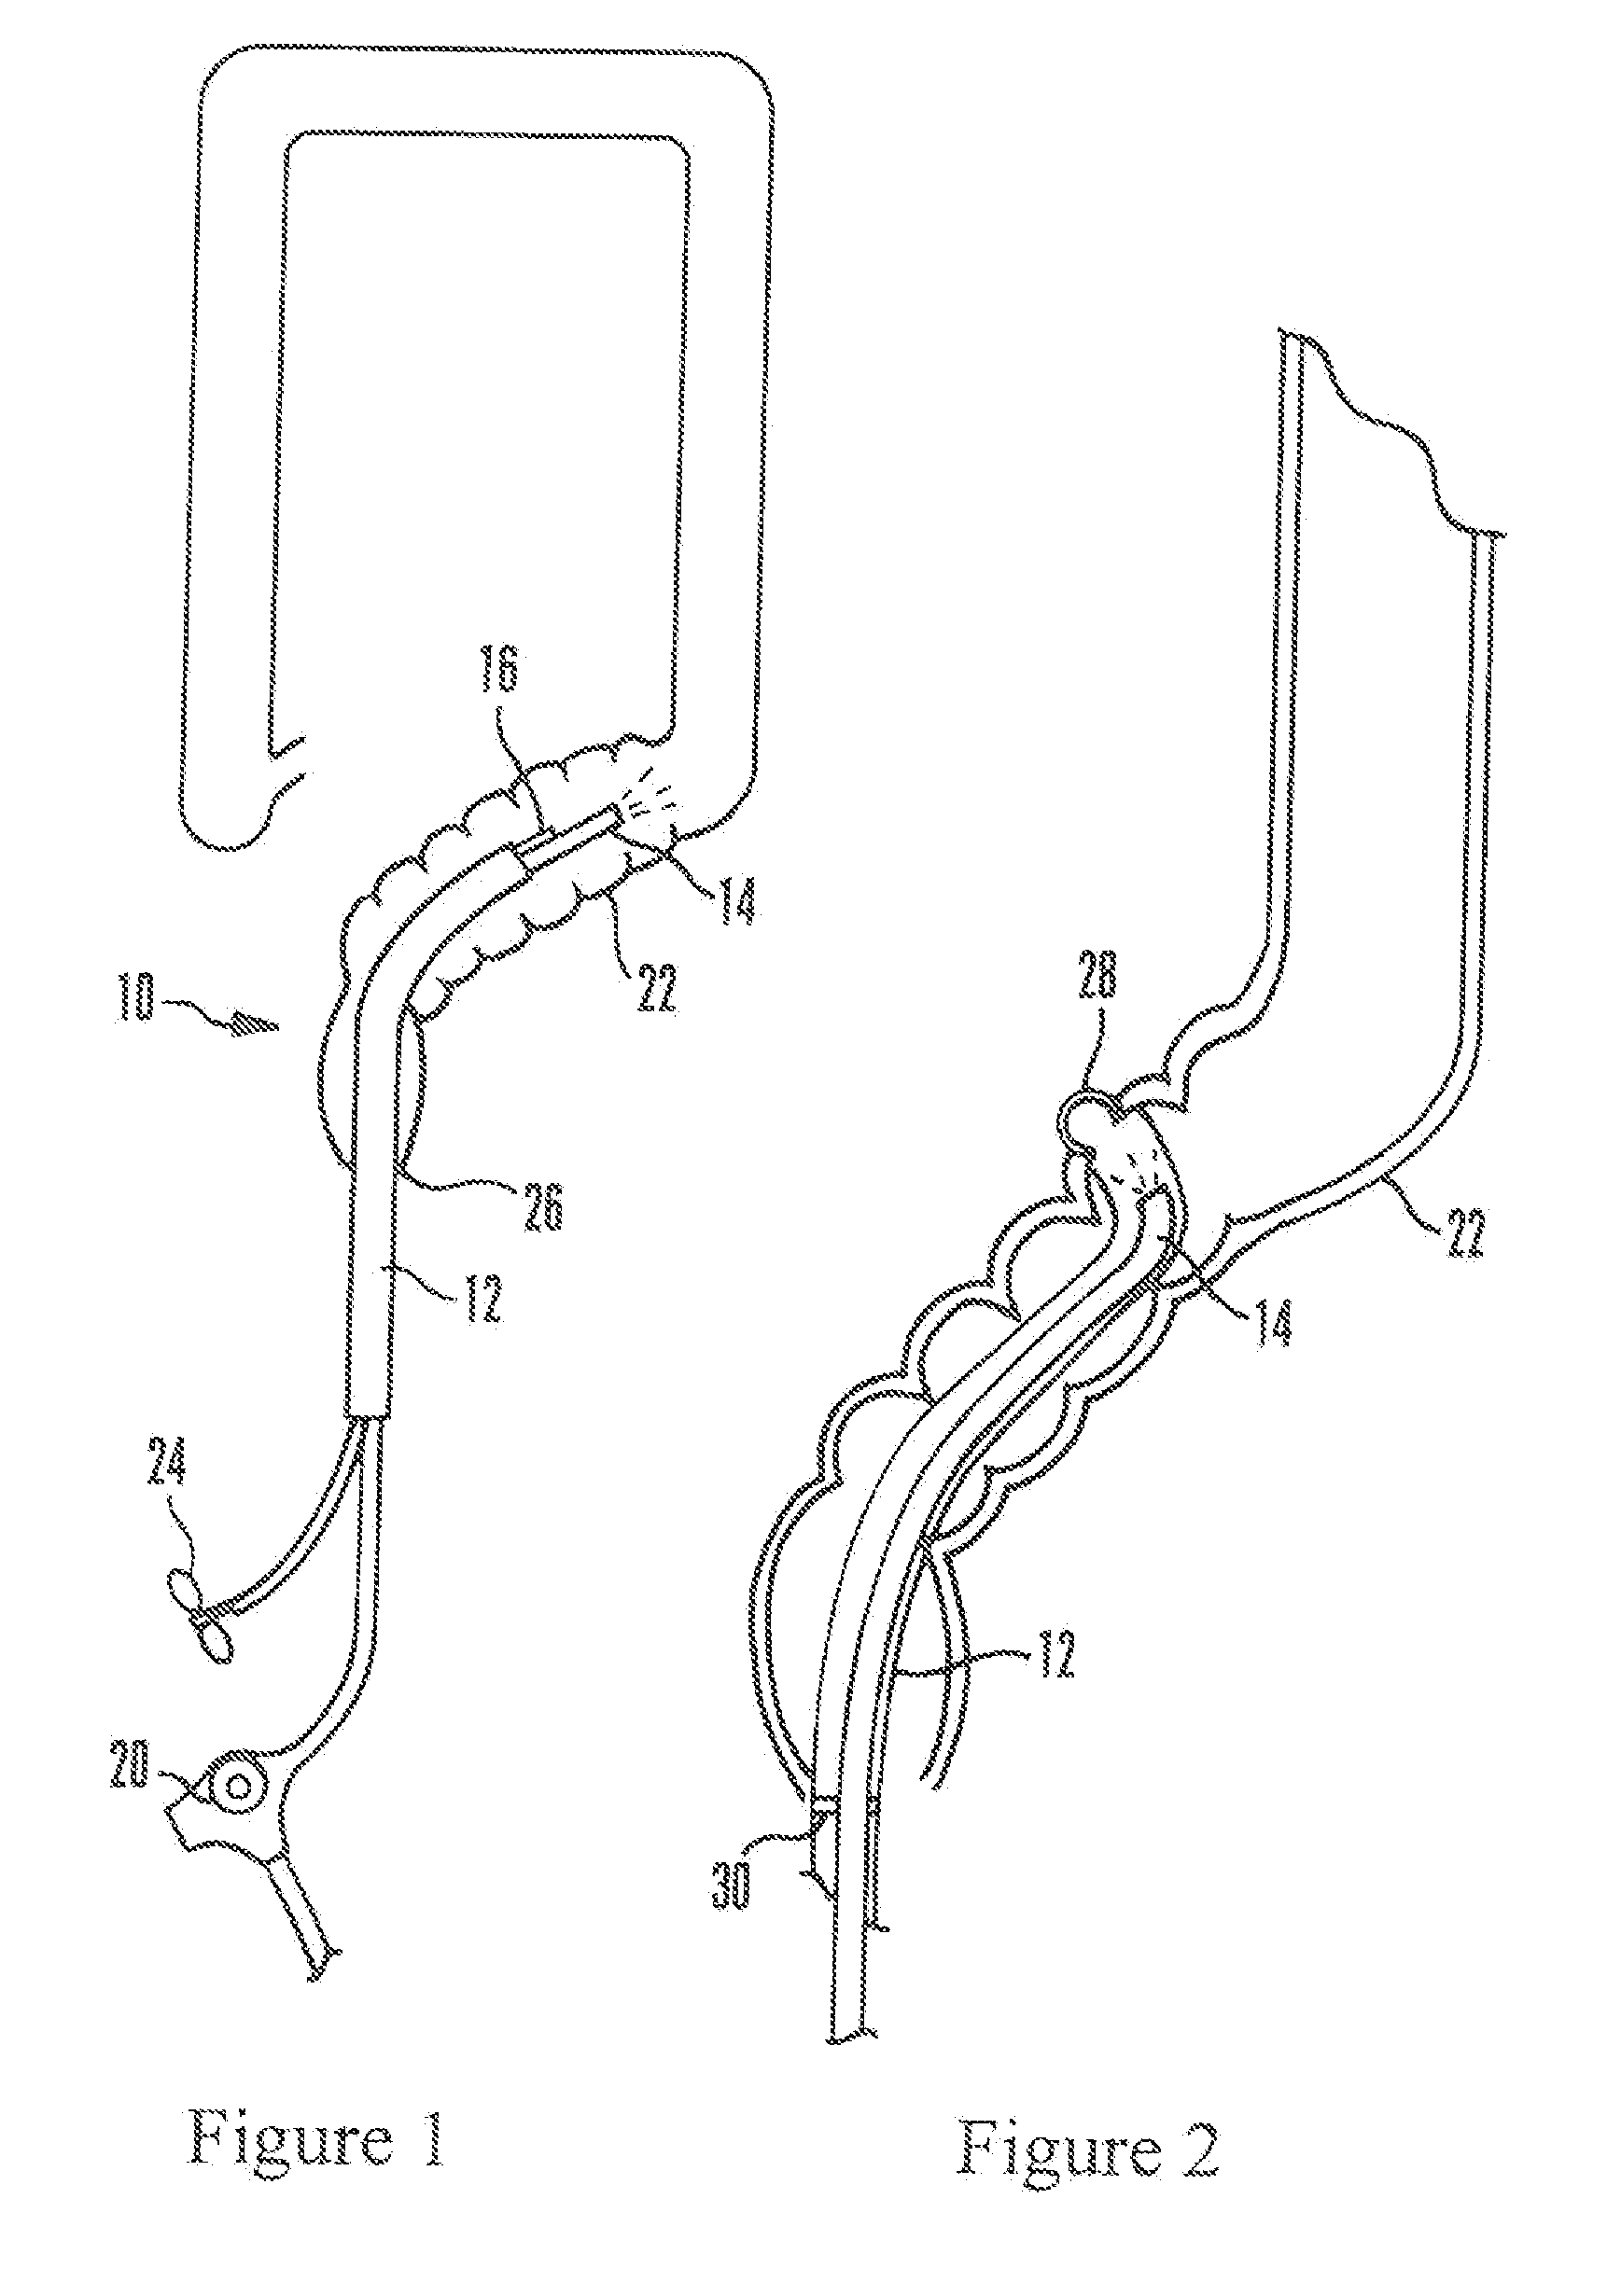 Systems and methods for endoscopic inversion and removal of diverticula